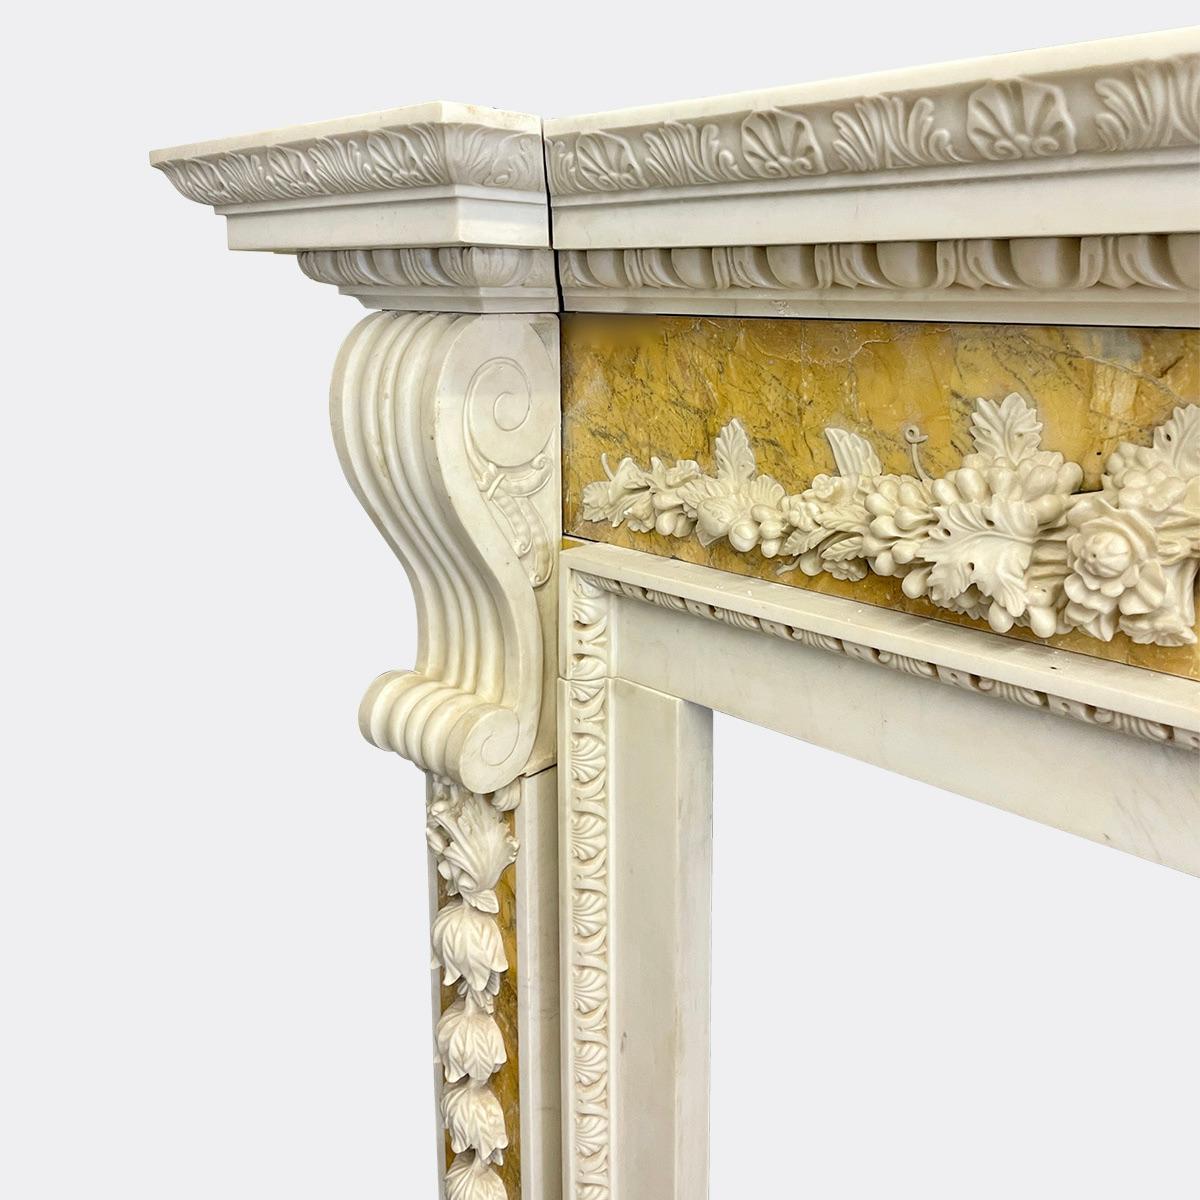 A substantial Palladian style fireplace in White and Siena Marbles. The 3 piece breakfront shelf with Acanthus and Egg and Dart mouldings, the Siena frieze below with carvings applied in white marble of Urn and vines, the jambs with large corbels